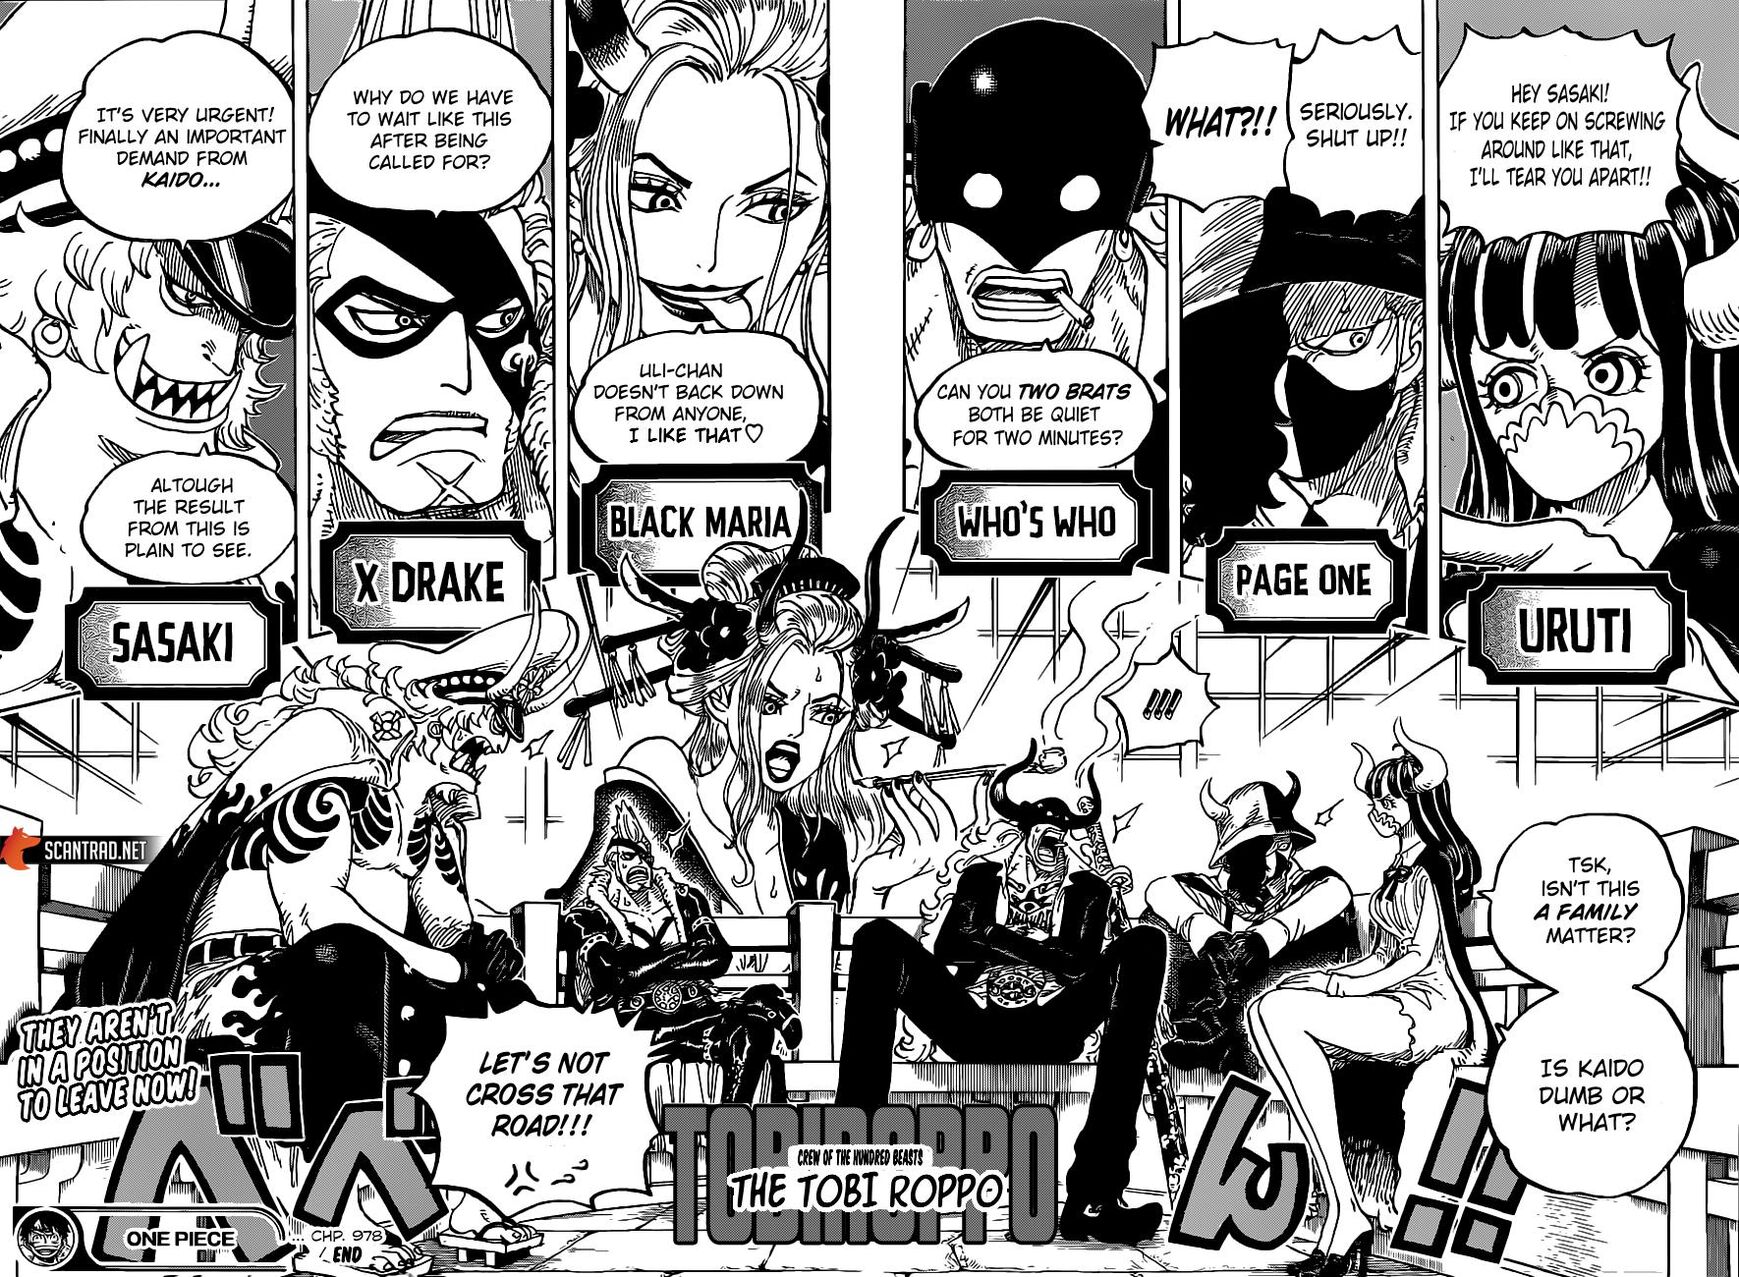 One Piece, Chapter 978 - Vol.69 Ch.978 image 11